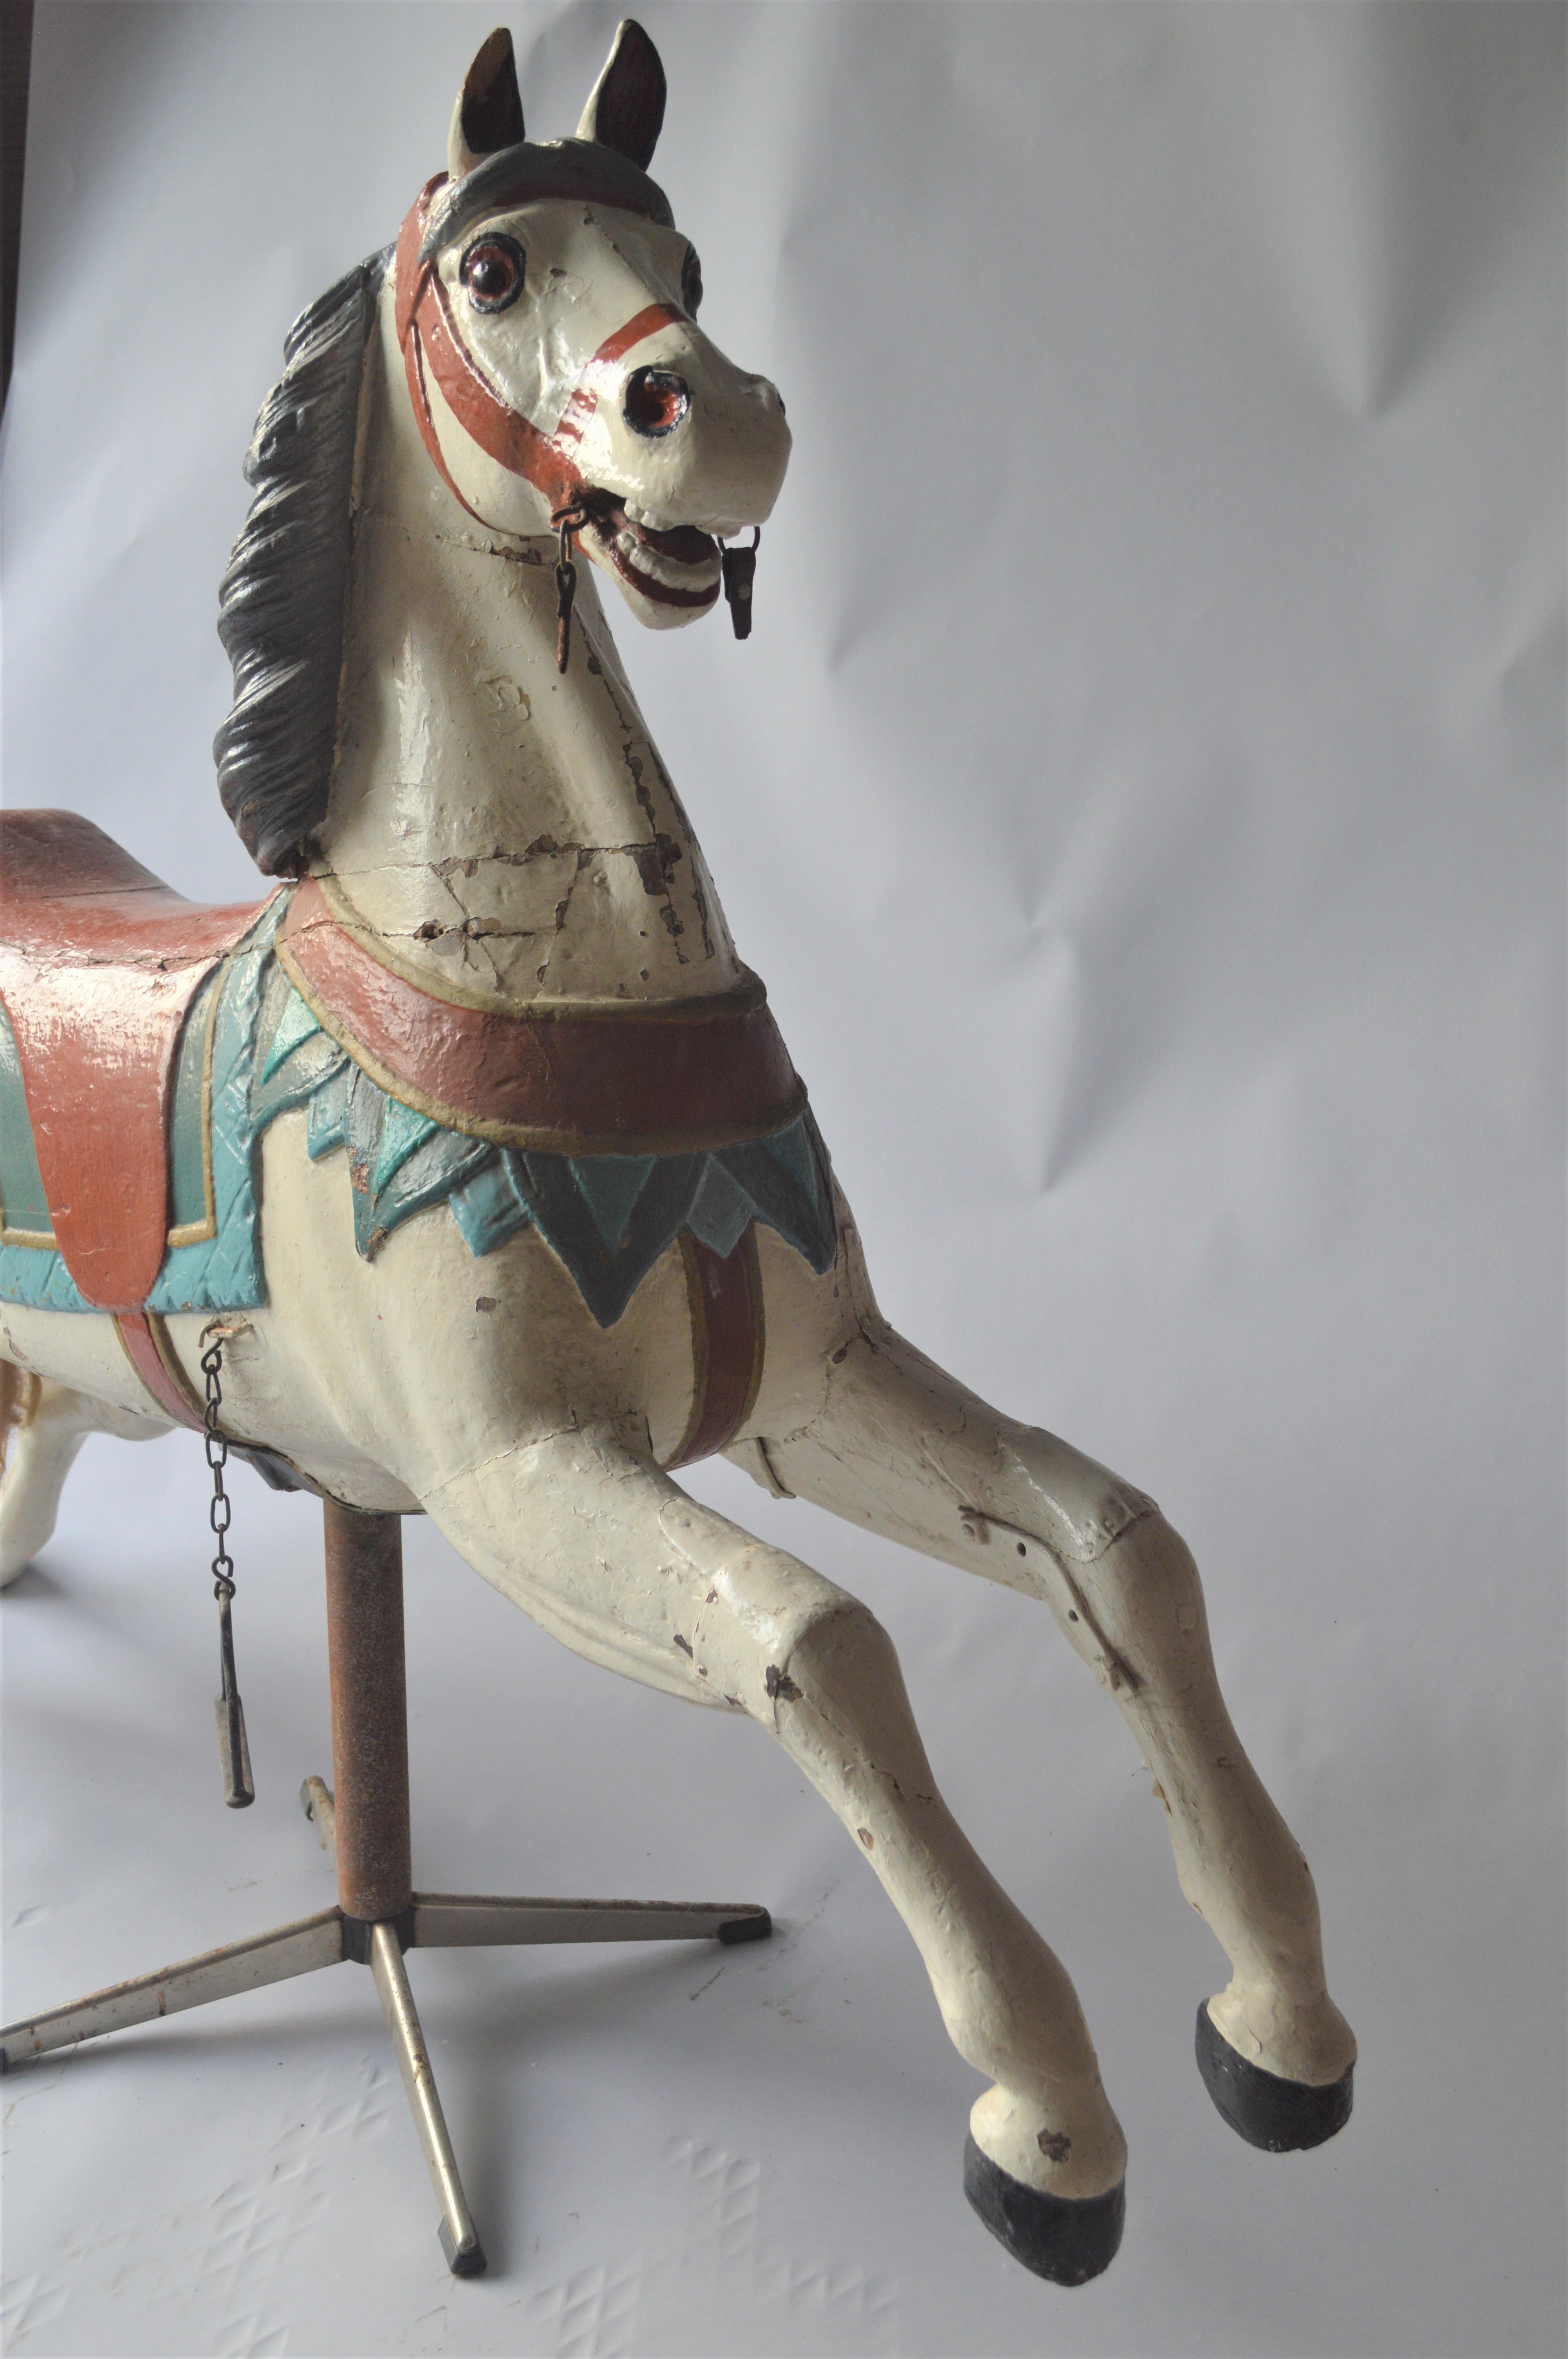 Painted Early 20th Century Merry Go Round Wooden Horse For Sale